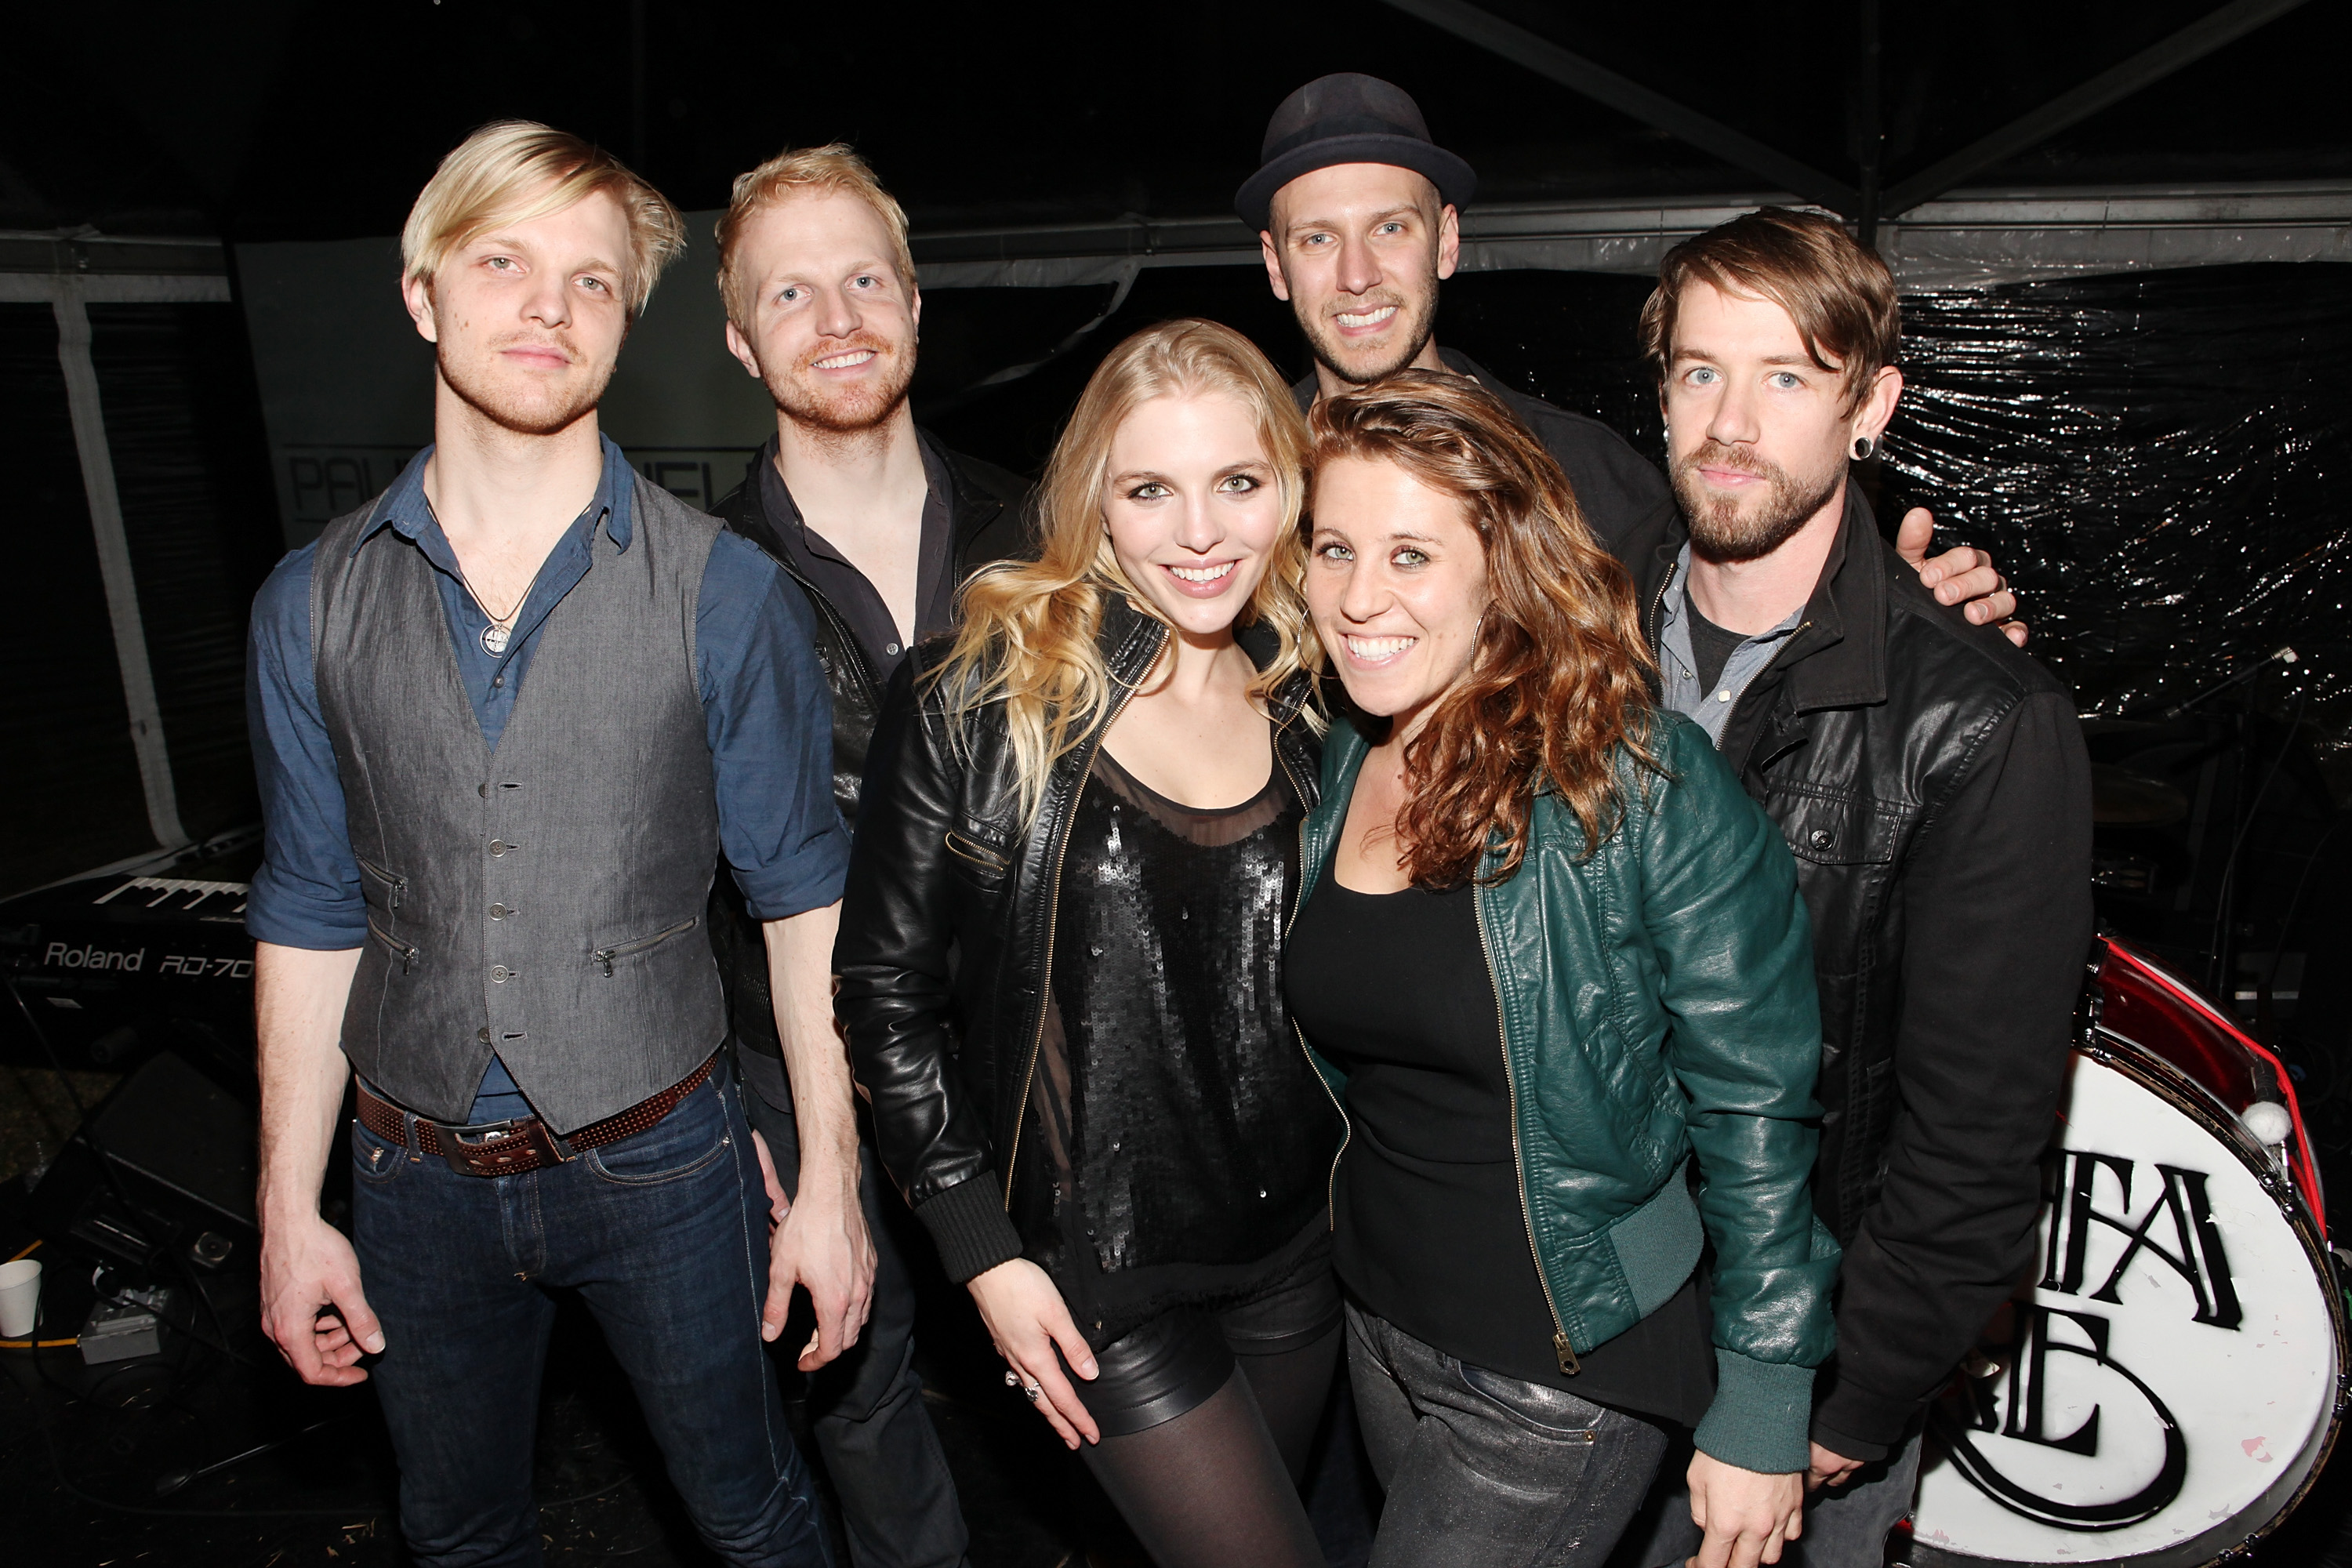 AUSTIN, TX - MARCH 11:  Band members of Delta Rae attend Forbes' "30 Under 30" SXSW Private Party on March 11, 2013 in Austin, Texas.  (Photo by Roger Kisby/WireImage)